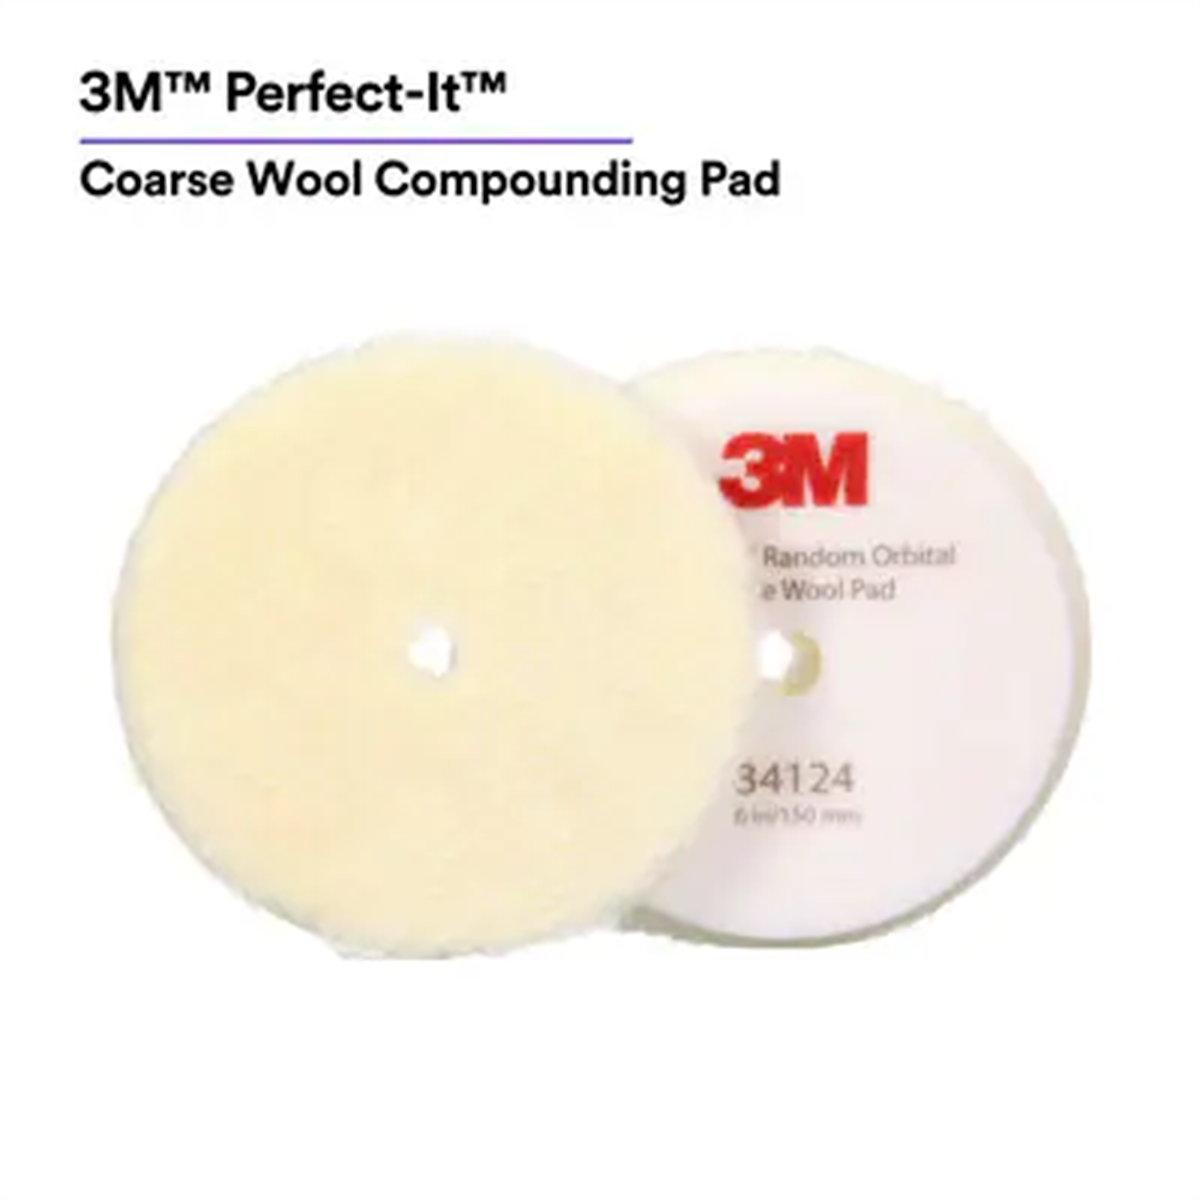 Picture of 3M MMM34124 6 in. Perfect-It Random Orbital Coarse Wool Compounding Pad, White - 2 Pads per Bag